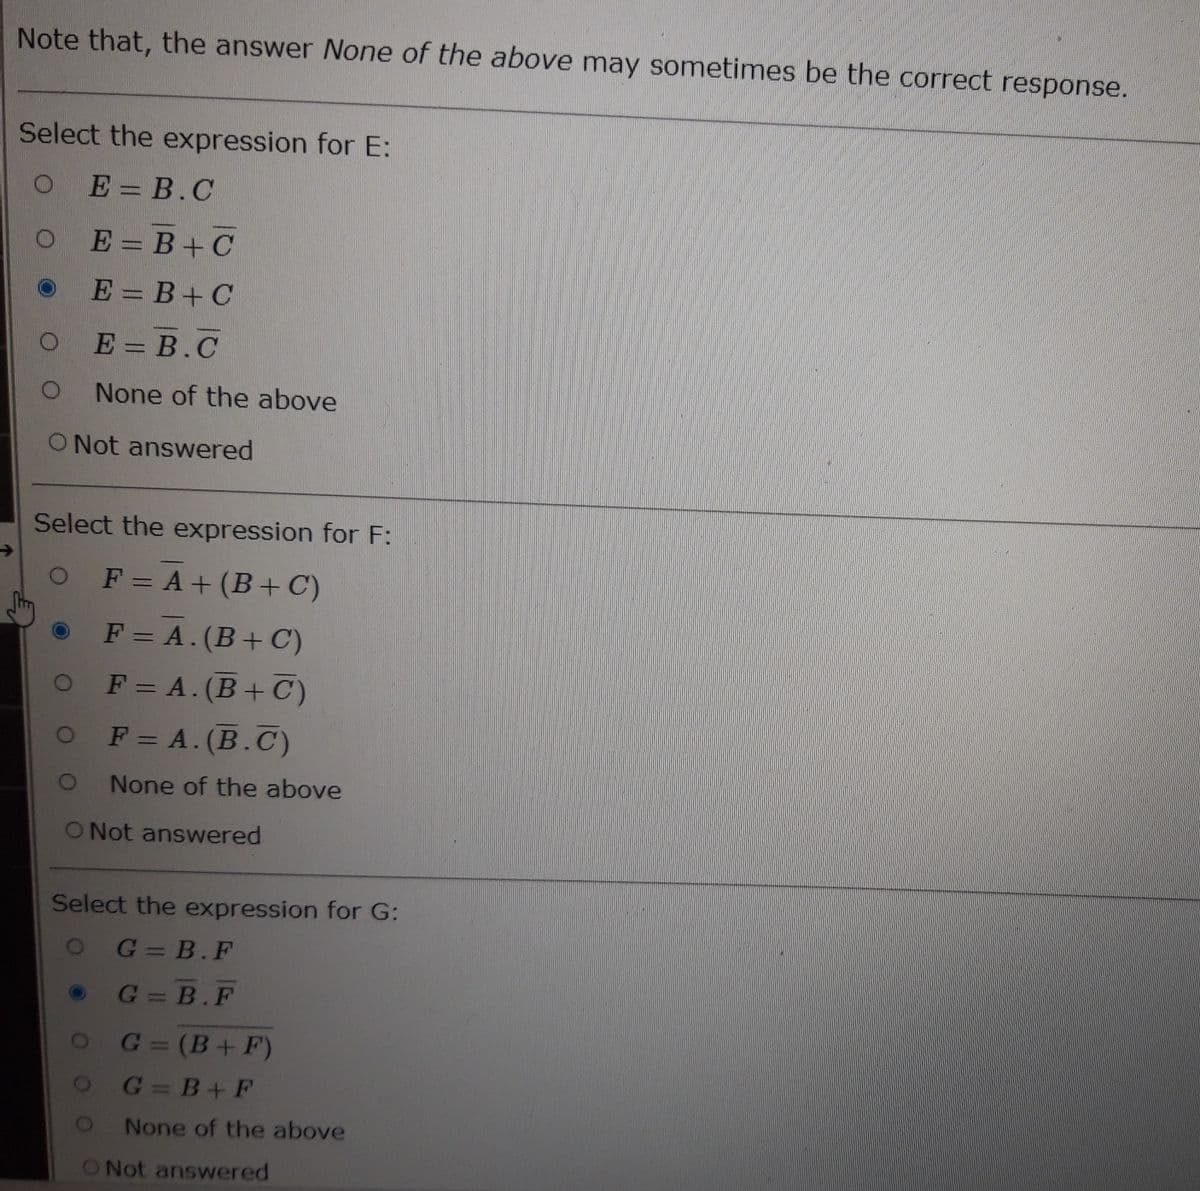 Note that, the answer None of the above may sometimes be the correct response.
Select the expression for E:
O E = B.C
O
E=B+C
E = B+C
E = B.C
None of the above
O Not answered
Select the expression for F:
O F = A + (B+C)
F = A. (B+C)
F = A. (B+C)
O F = A. (B.C)
O
O Not answered
None of the above
Select the expression for G:
O G=B.F
G=B.F
O
G=(B+F)
G=B+F
None of the above
O Not answered